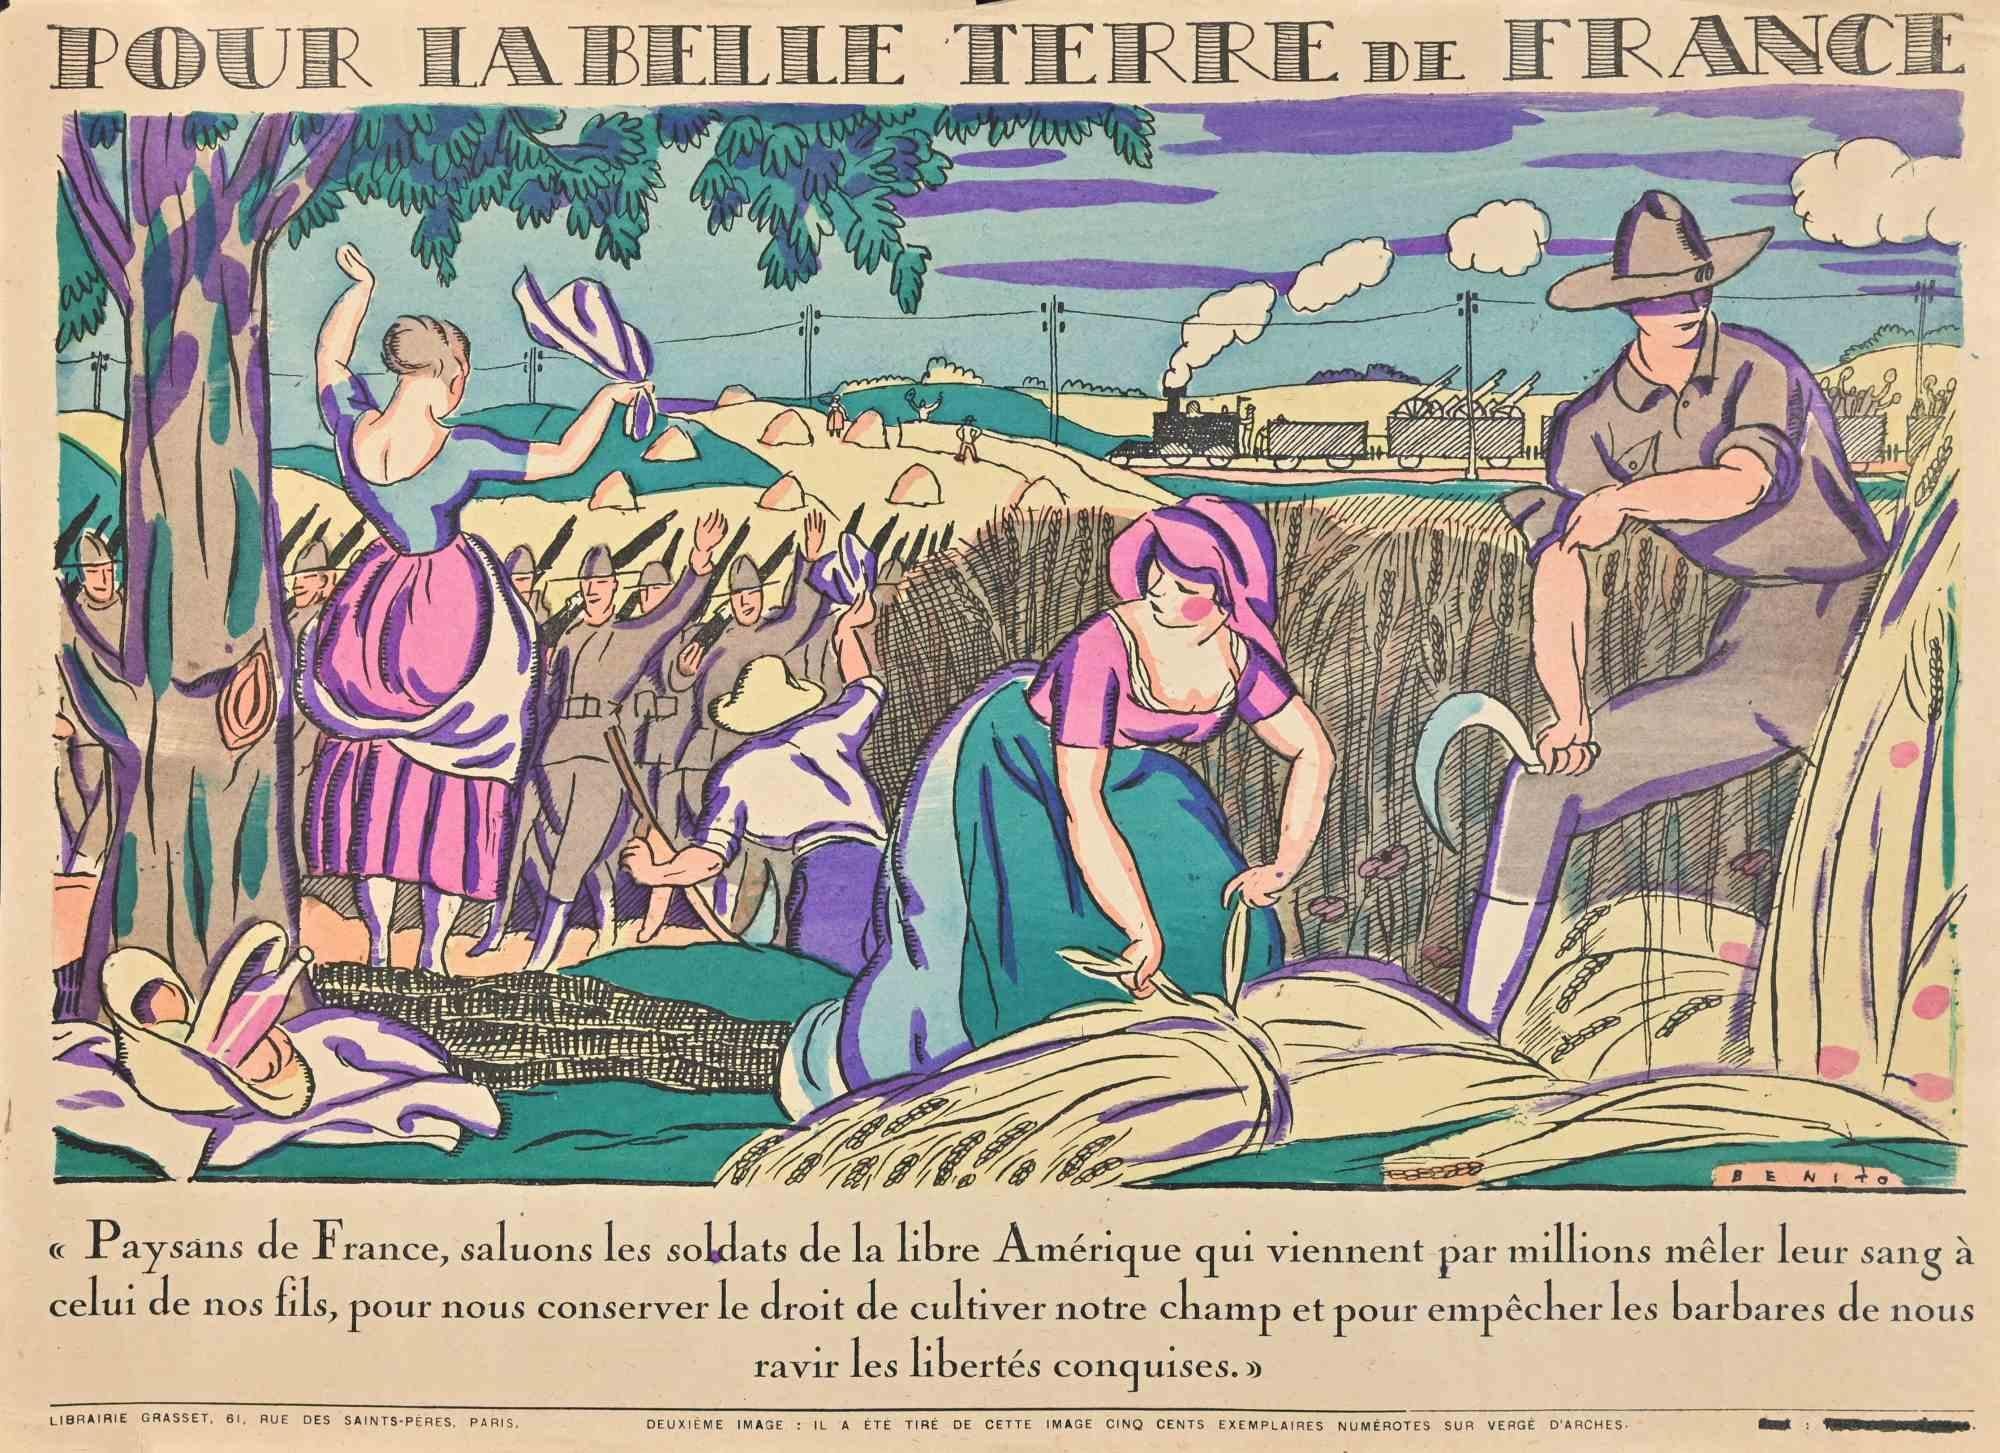 Pour la belle terre de France is an original Woodcut print by Benito (Edmond Garcia, 1891-1961) realized in the Early 20th Century.

Good condition.

Edition of 500, not numbered.

The artwork is depicted through strong strokes in a well-balanced